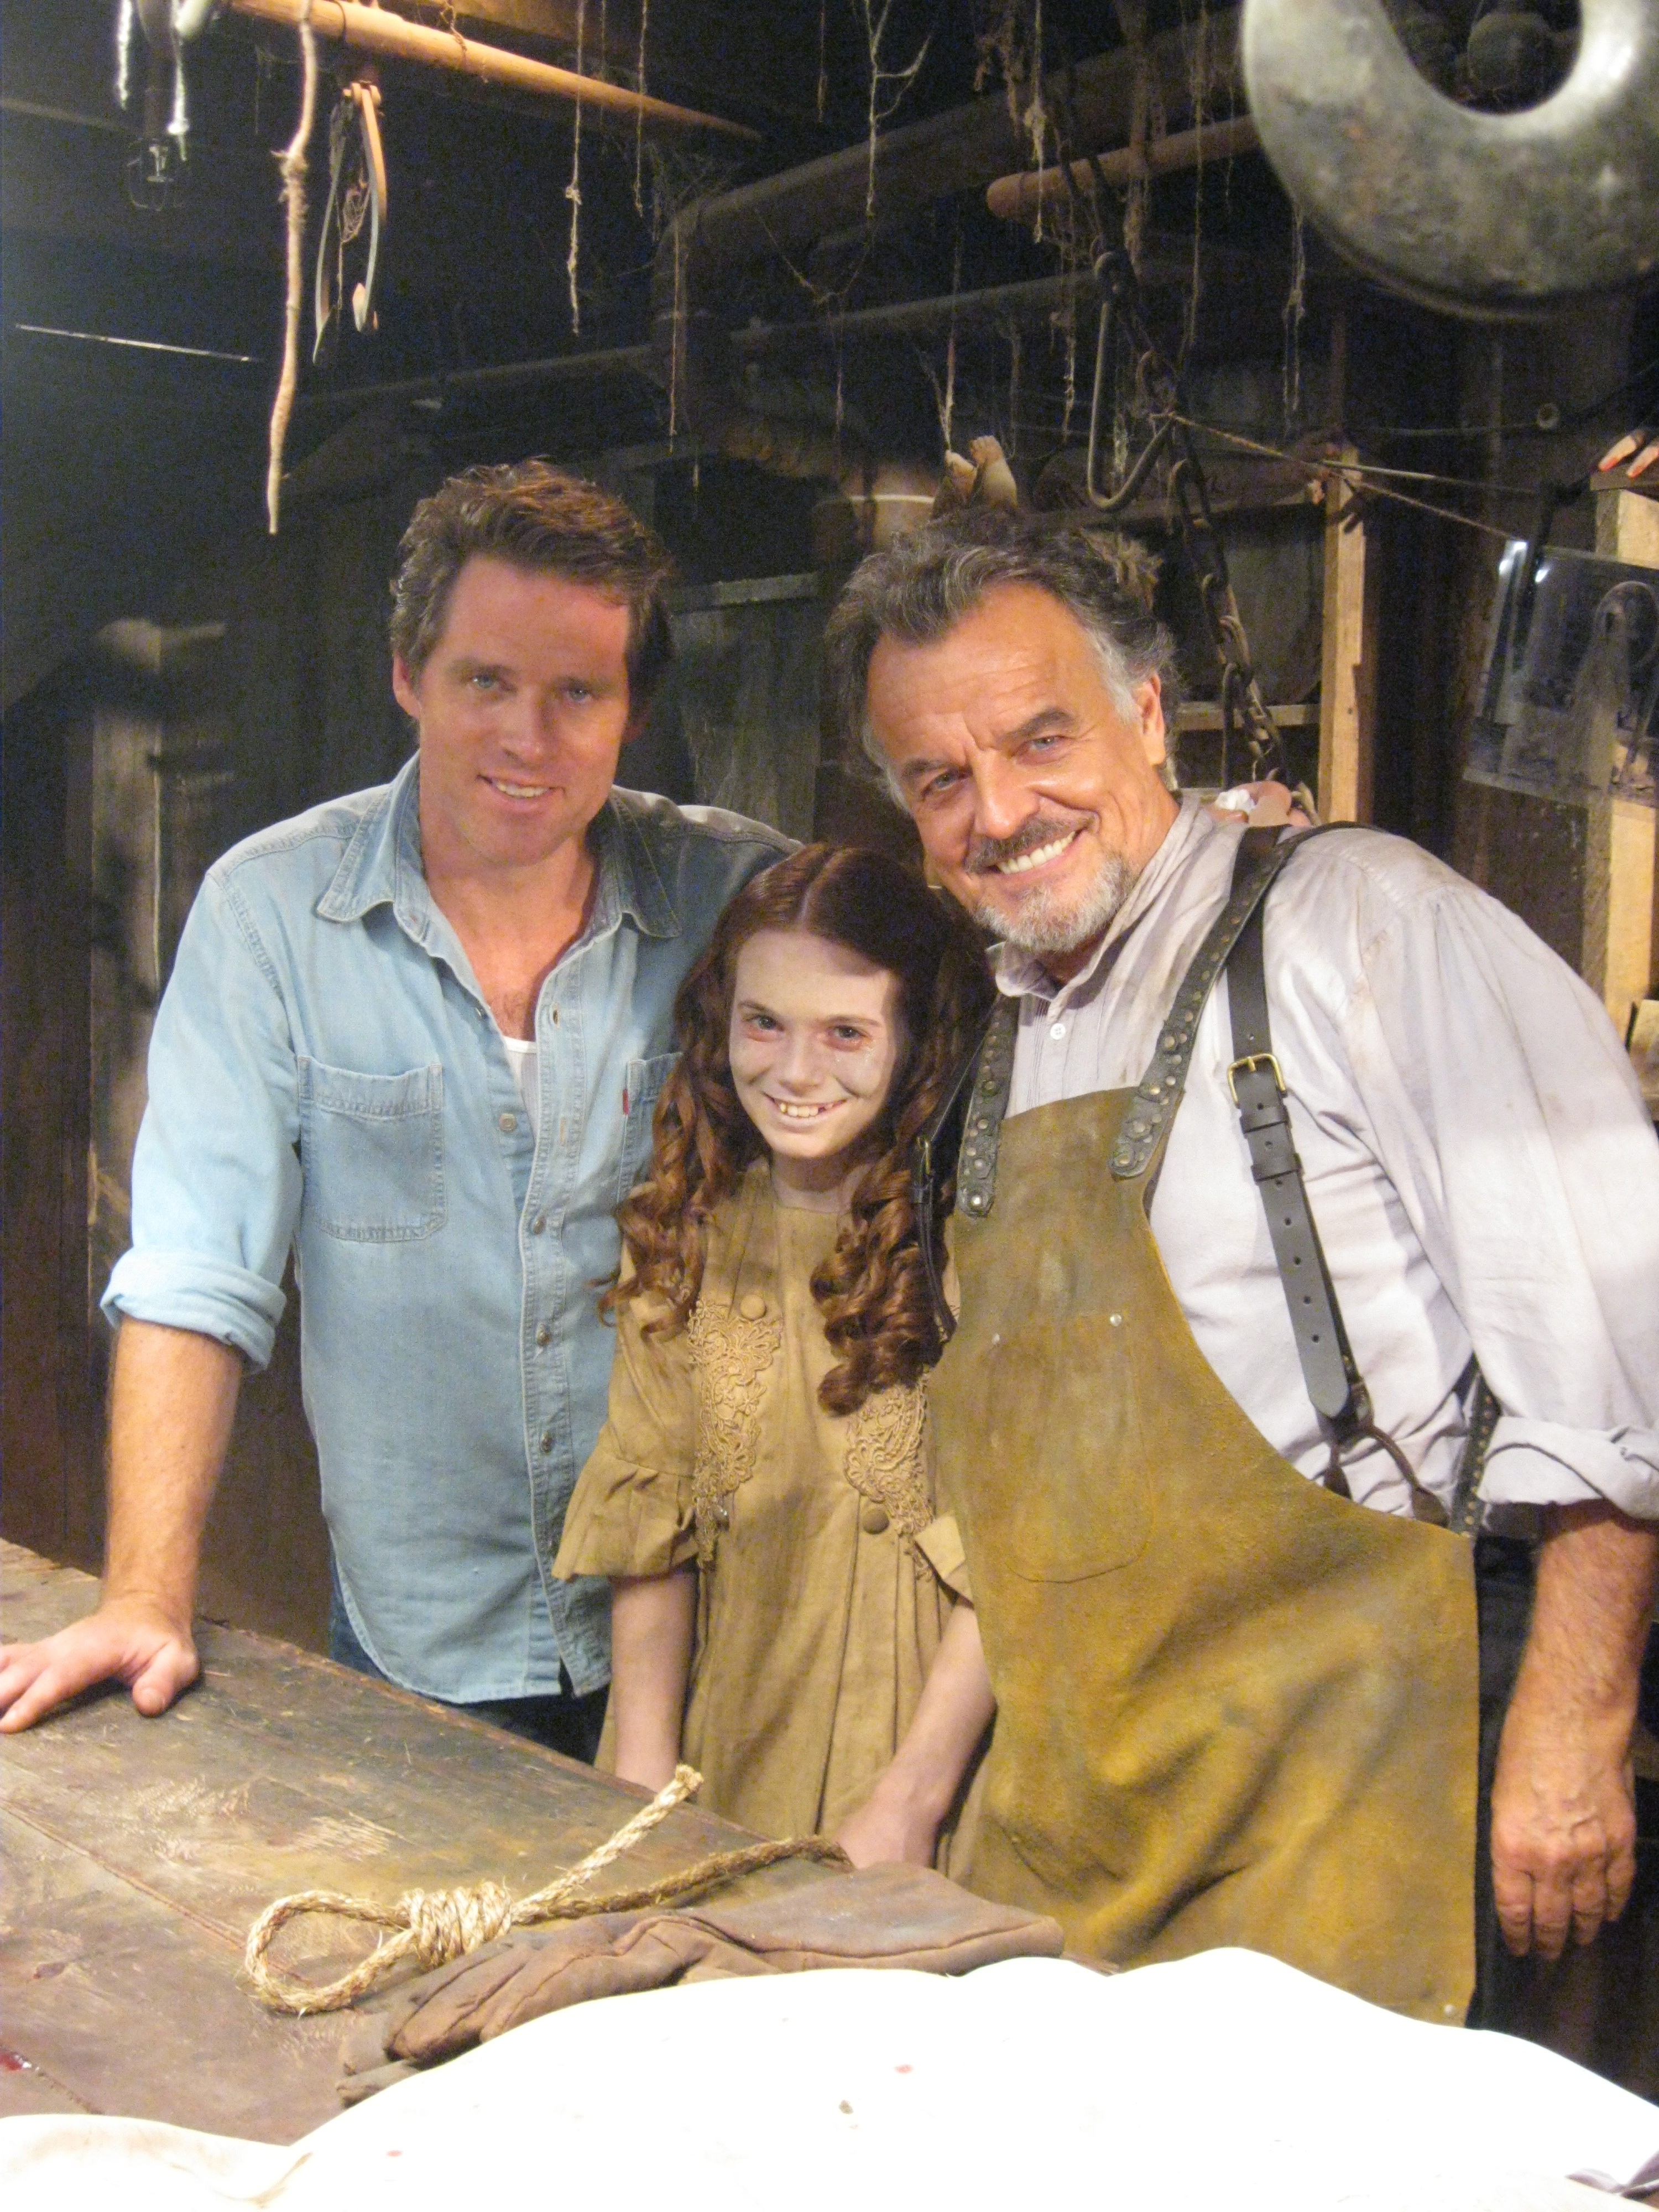 Evelyn Boyle on the set of Dead Still with Ben Browder and Ray Wise